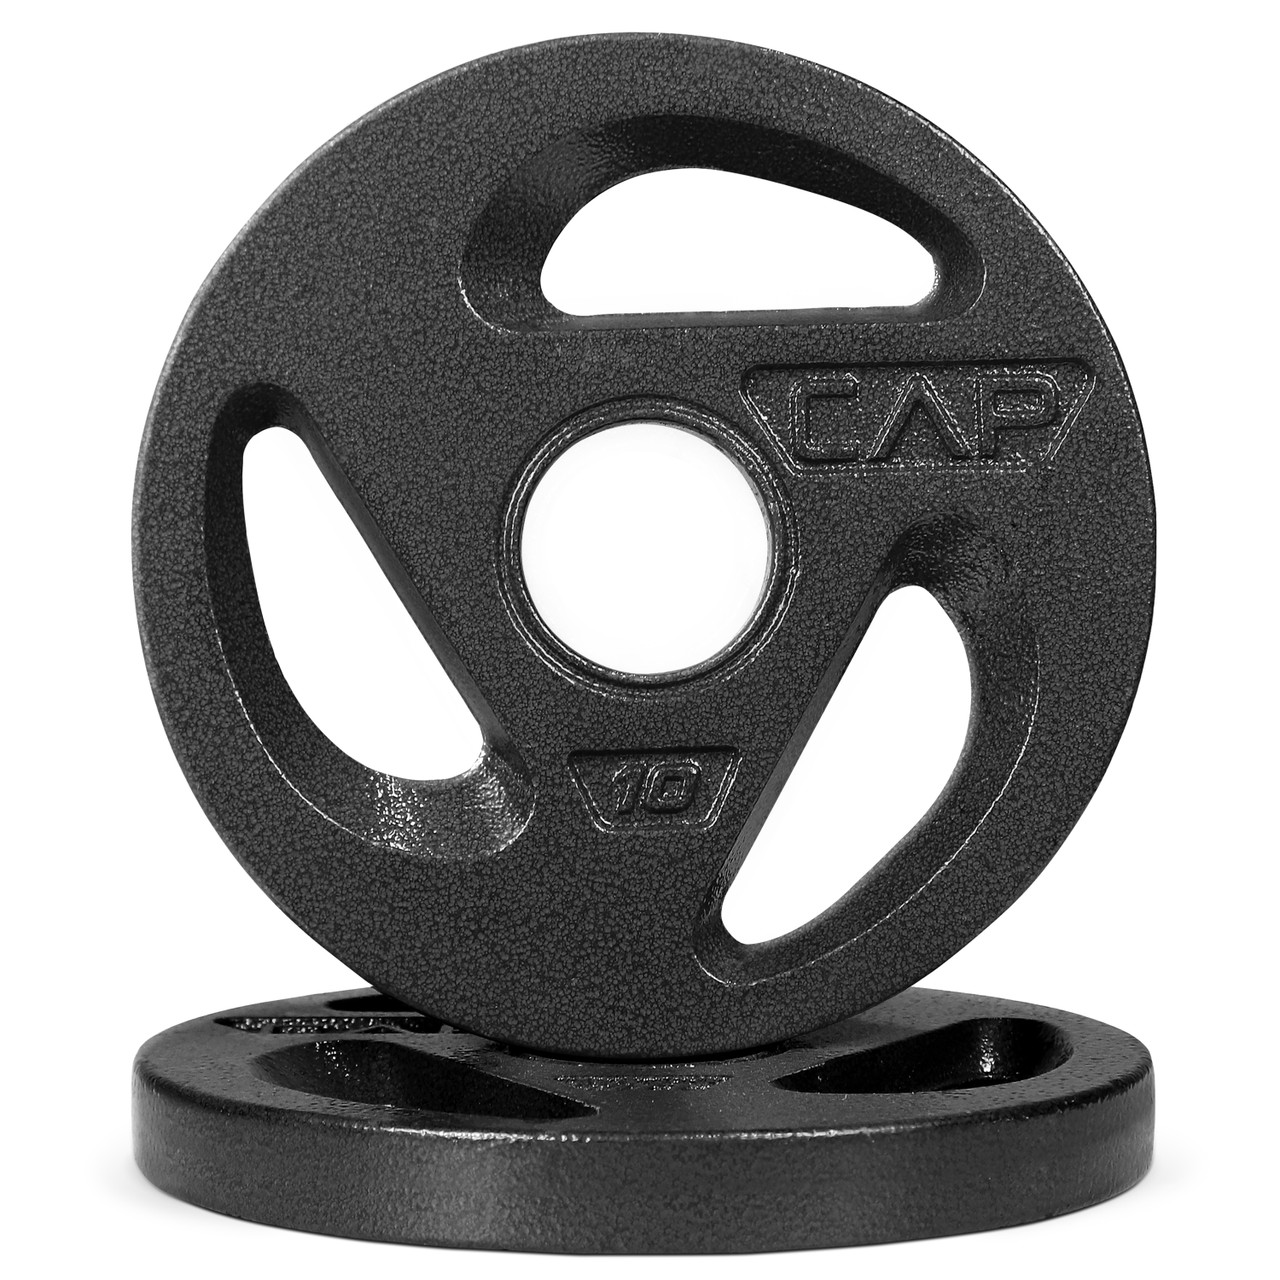 Compatible with 1-Inch Standard Barbell 3 Holes Grip Offering Athletes a Comfortable Grip and an Easier Way to Lift WF Athletic Supply 1-Inch Hole Cast Iron Grip Plate 